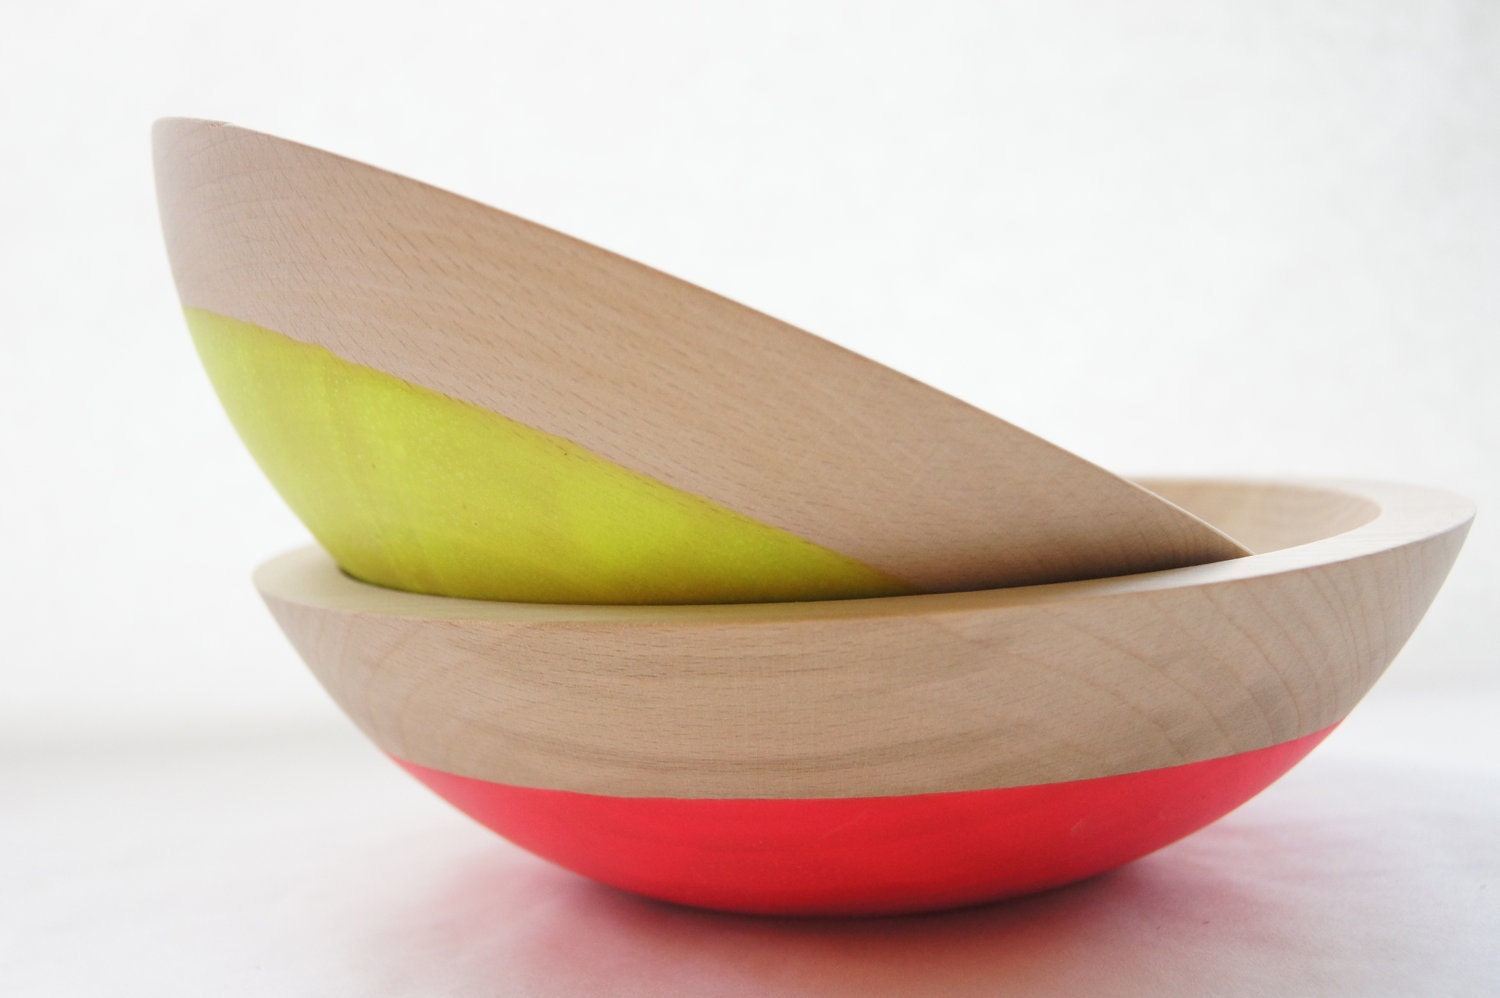 Wooden Salad Bowl, 7" Set of 2, Neon Pink, Neon Yellow, Summer Party, Salad Bowl